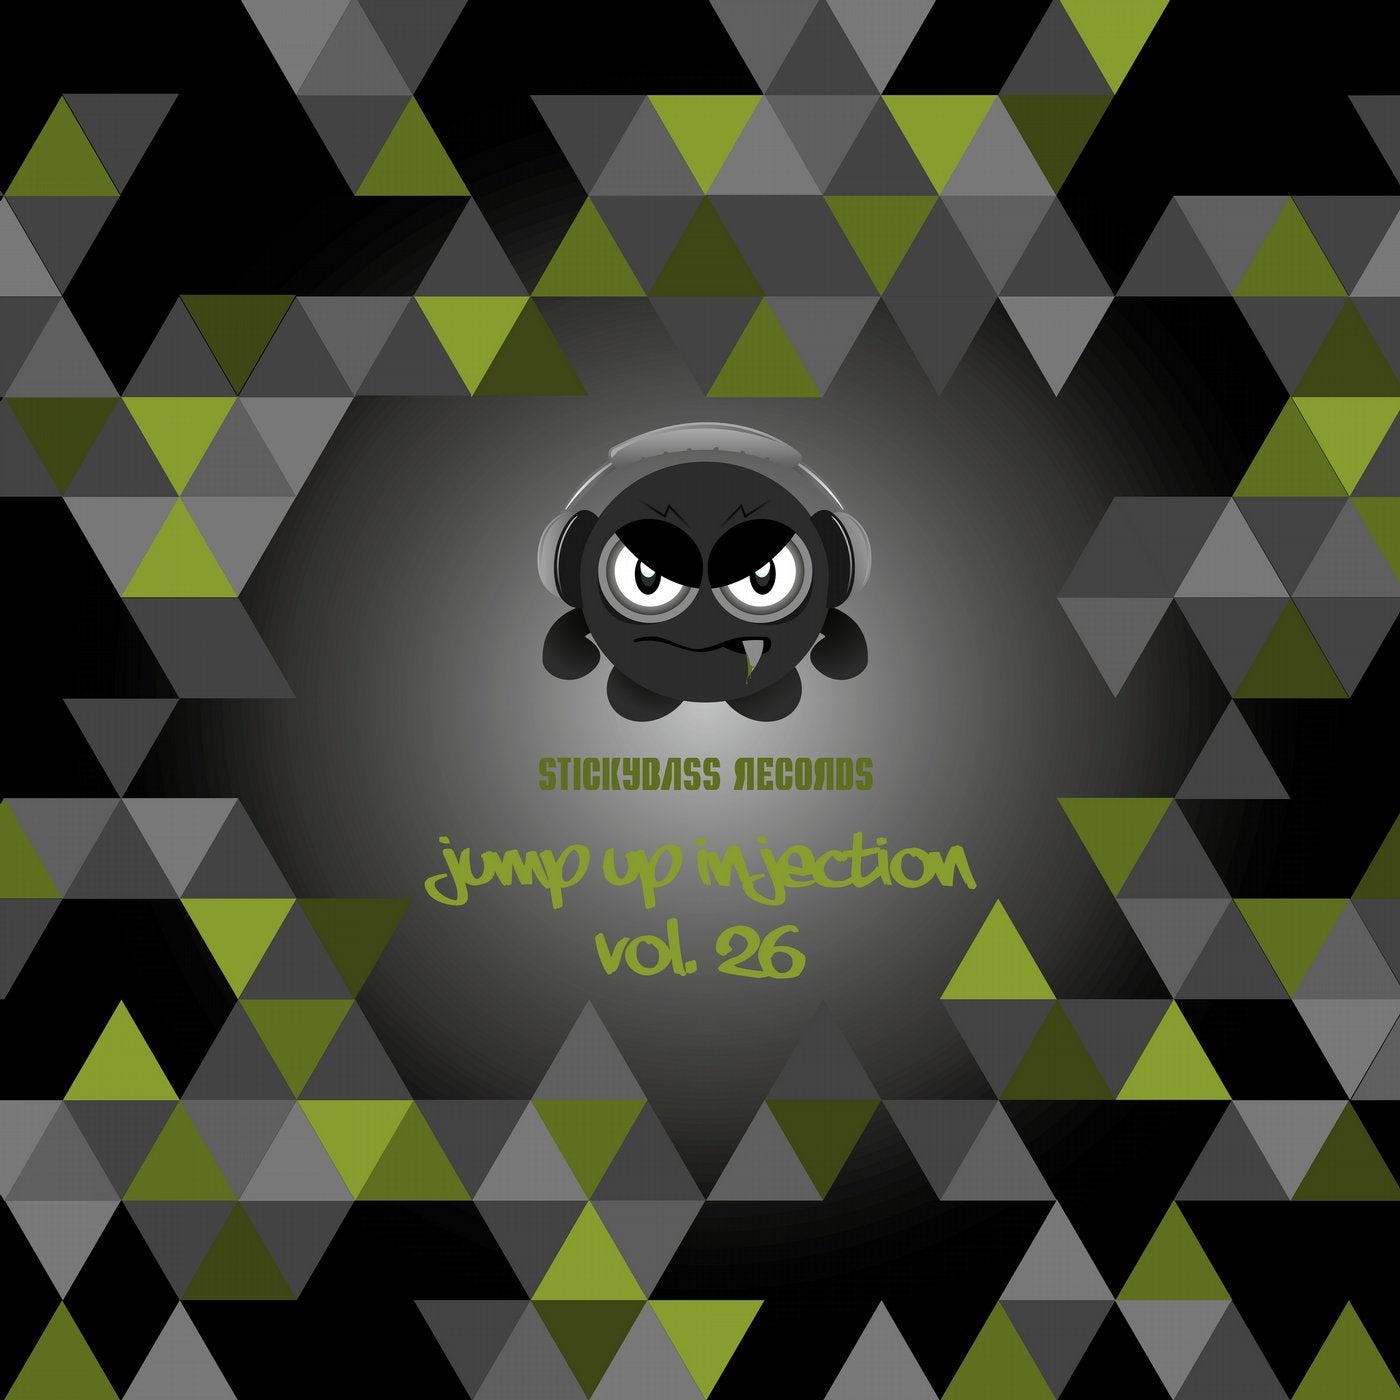 Jump up Injection, Vol. 26